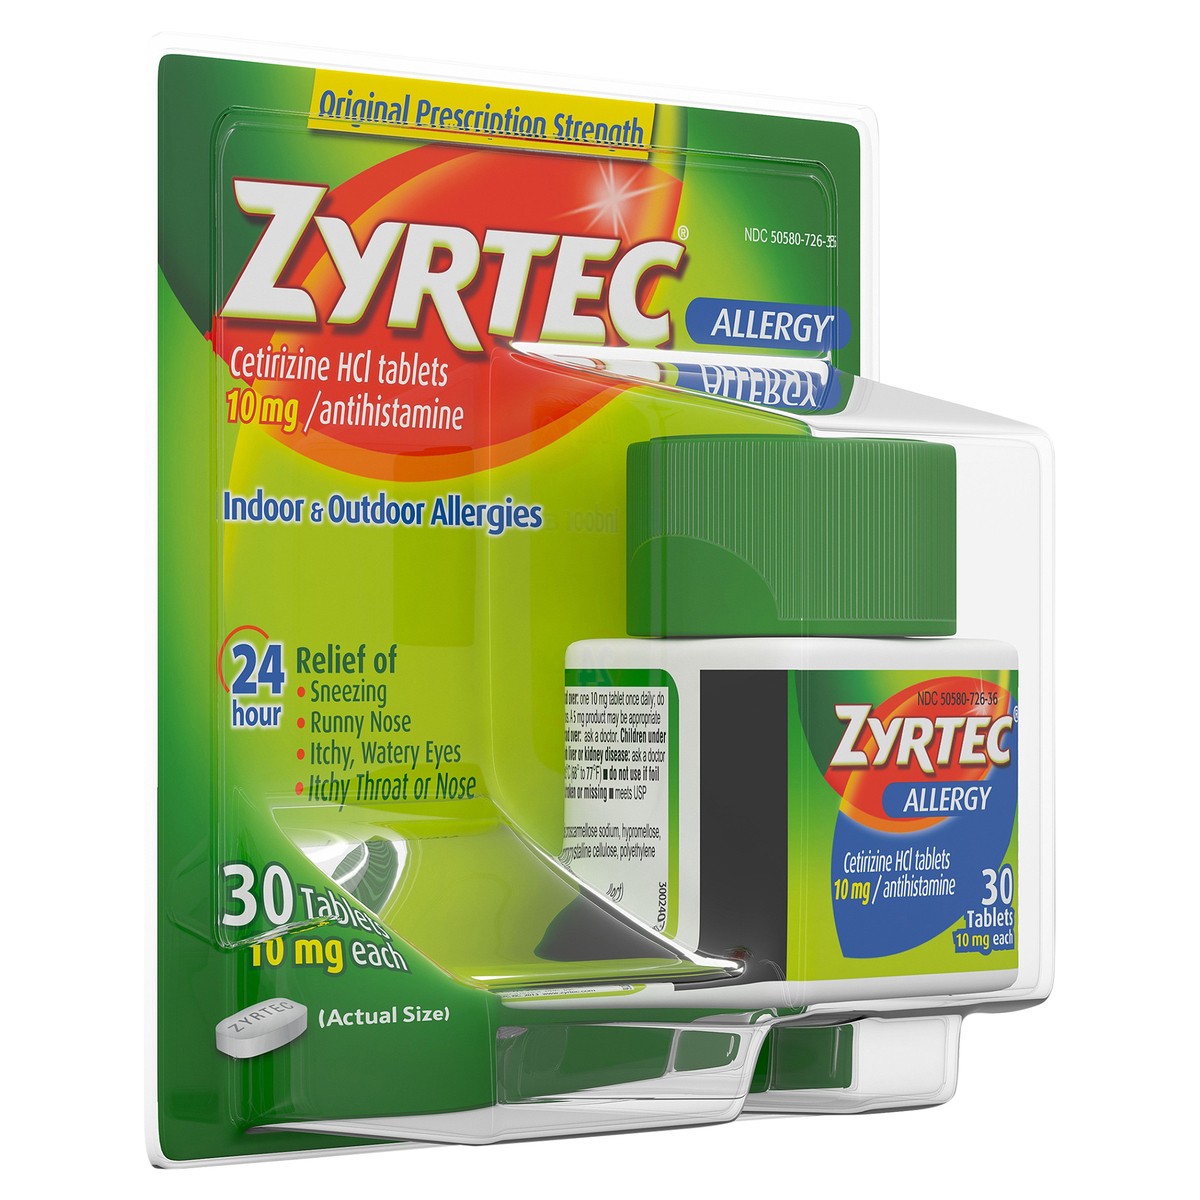 slide 5 of 7, Zyrtec 24 Hour Allergy Relief Tablets, Indoor & Outdoor Allergy Medicine with 10 mg Cetirizine HCl per Antihistamine Tablet, Relief from Runny Nose, Sneezing, Itchy Eyes & More, 30 ct, 30 ct